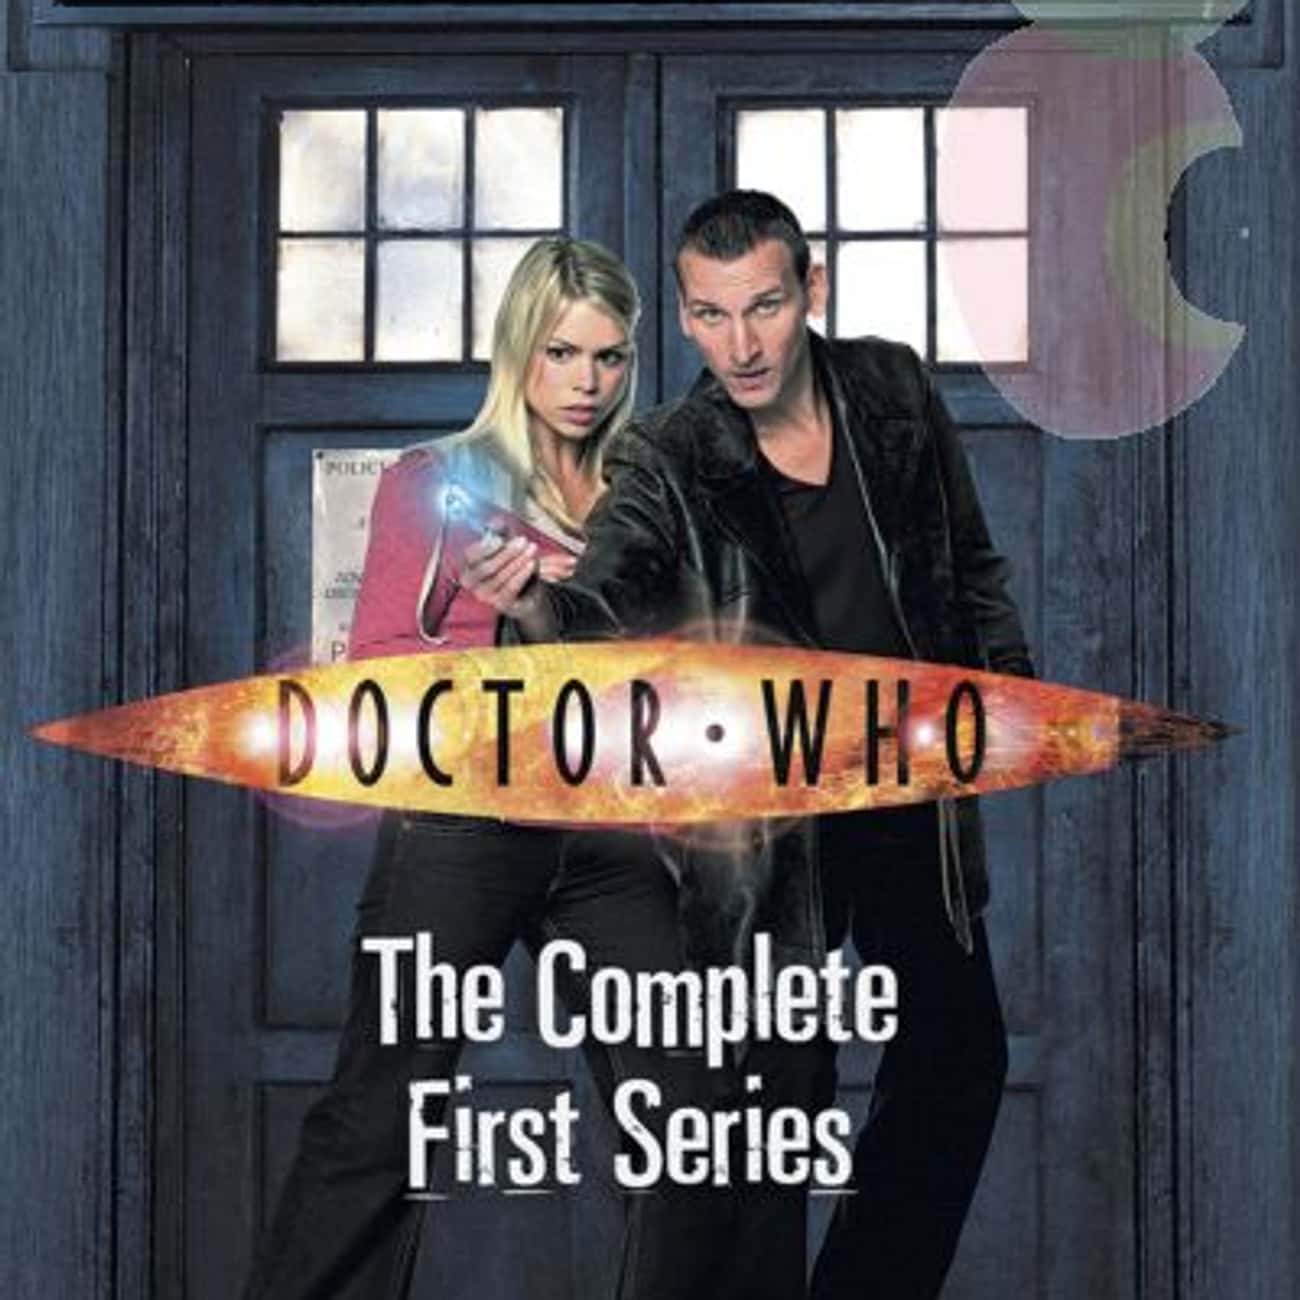 Doctor Who Series 1 (2005)